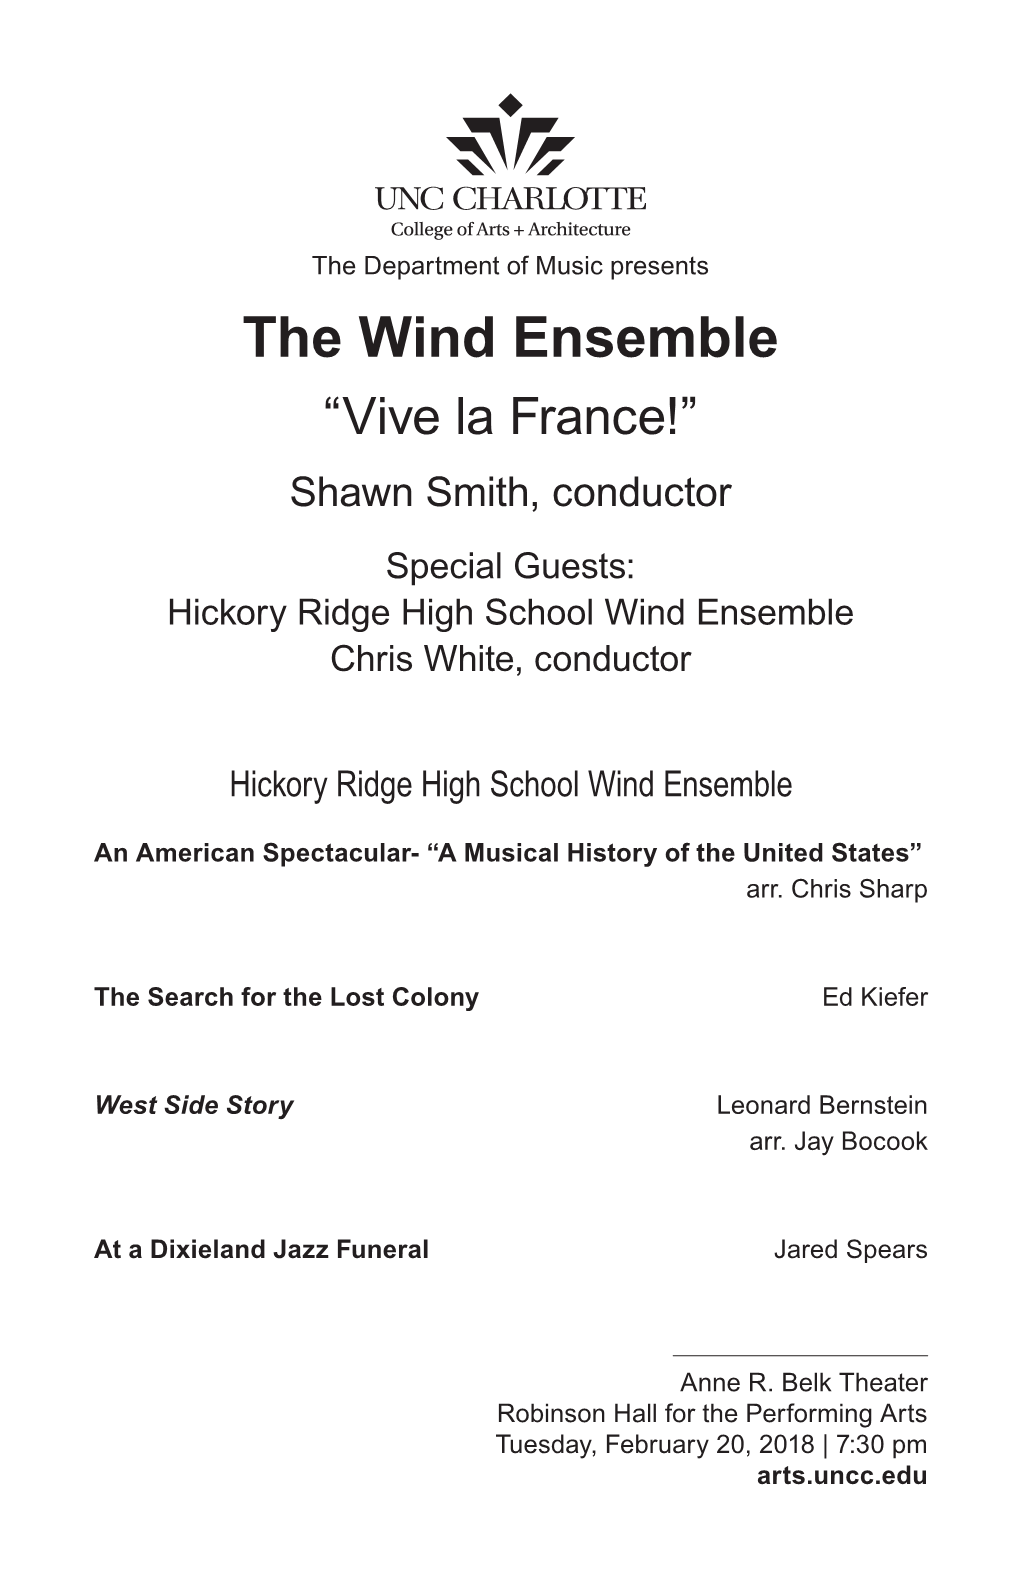 The Wind Ensemble “Vive La France!” Shawn Smith, Conductor Special Guests: Hickory Ridge High School Wind Ensemble Chris White, Conductor